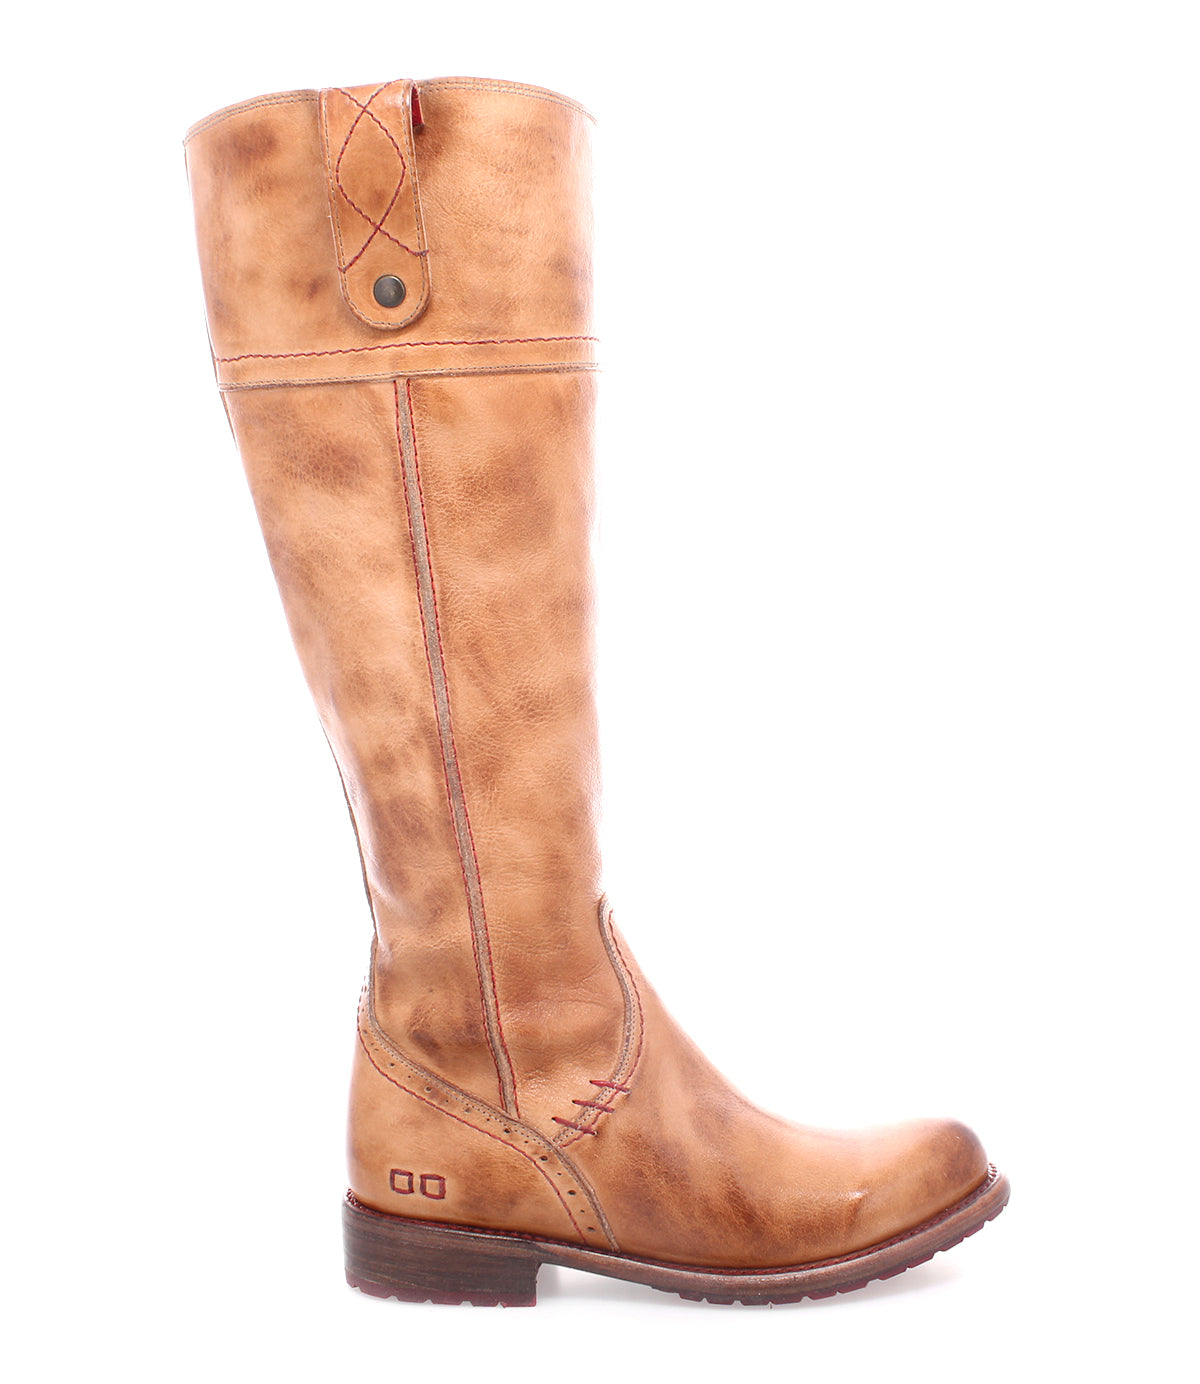 The Bed Stu Jacqueline Wide Calf leather boot is designed for women seeking a stylish and versatile tan riding boot.